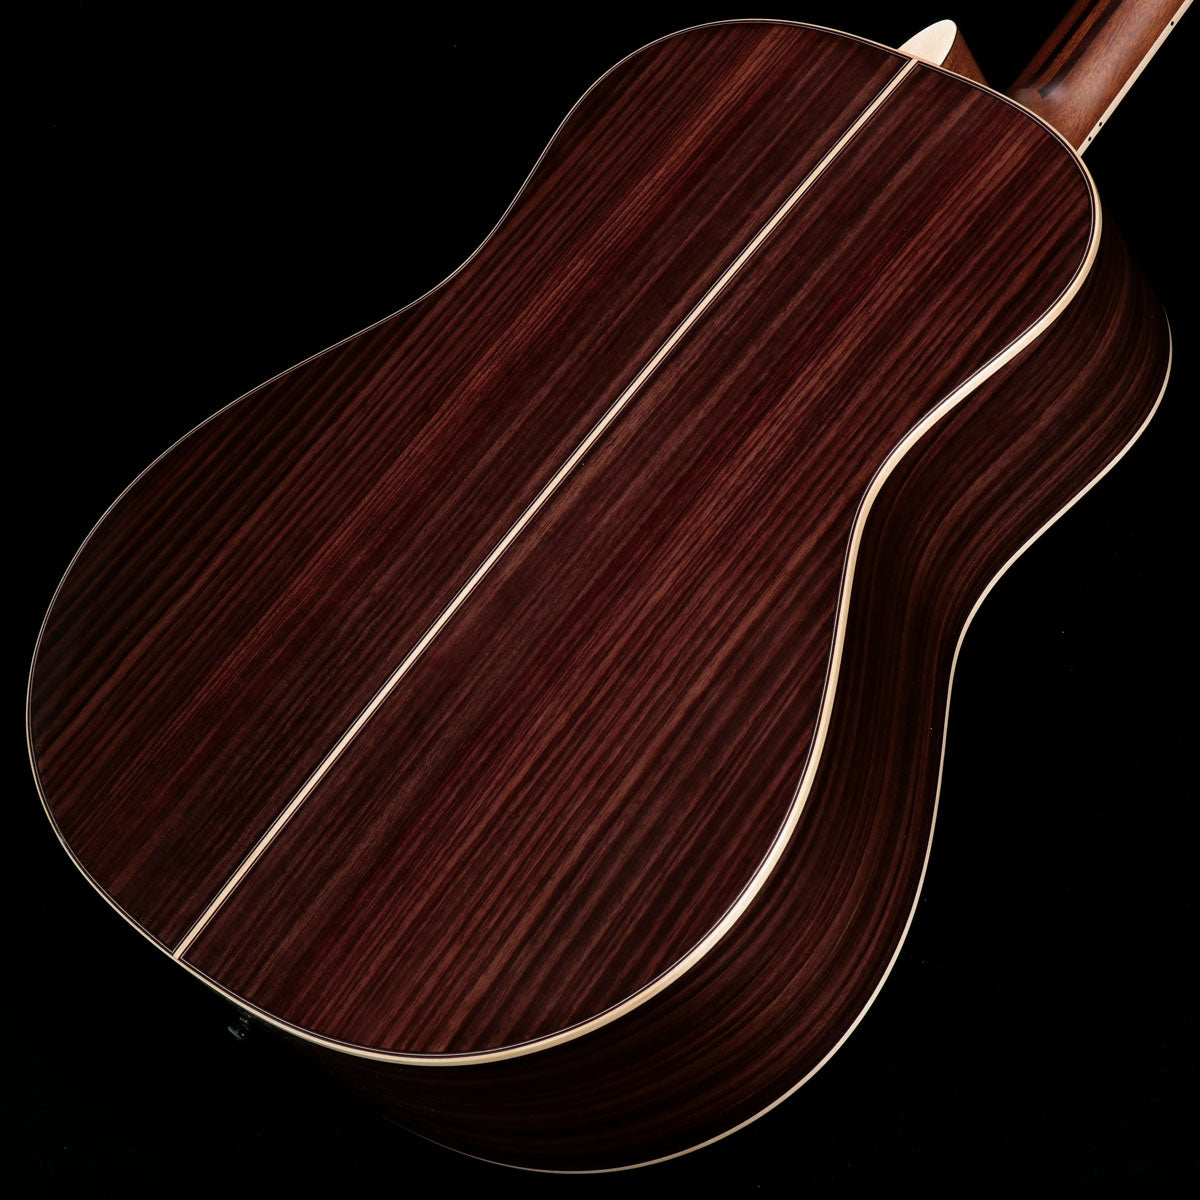 [SN IJZ036A] YAMAHA / LL36 ARE Natural Handcrafted []. [08]